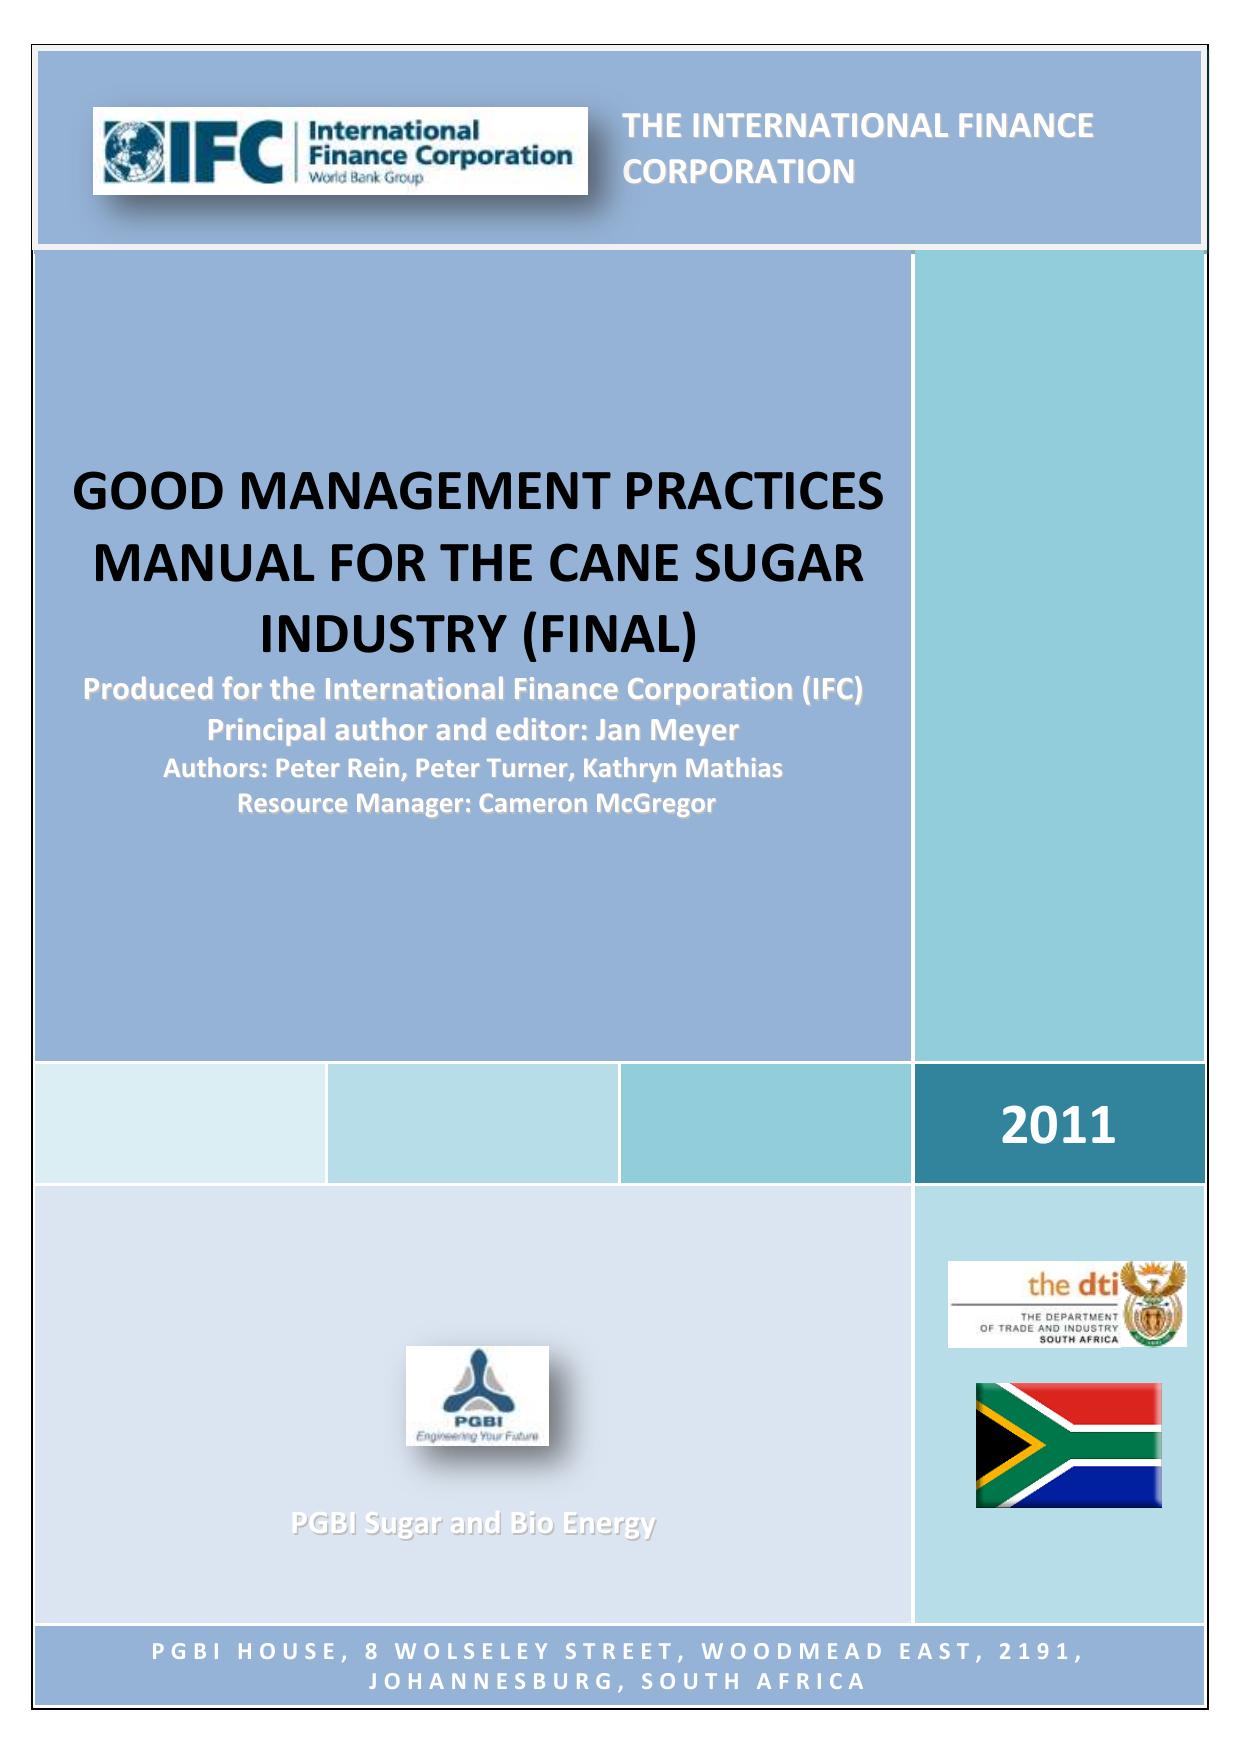 GOOD MANAGEMENT PRACTICES MANUAL FOR THE CANE SUGAR INDUSTRY (DRAFT)